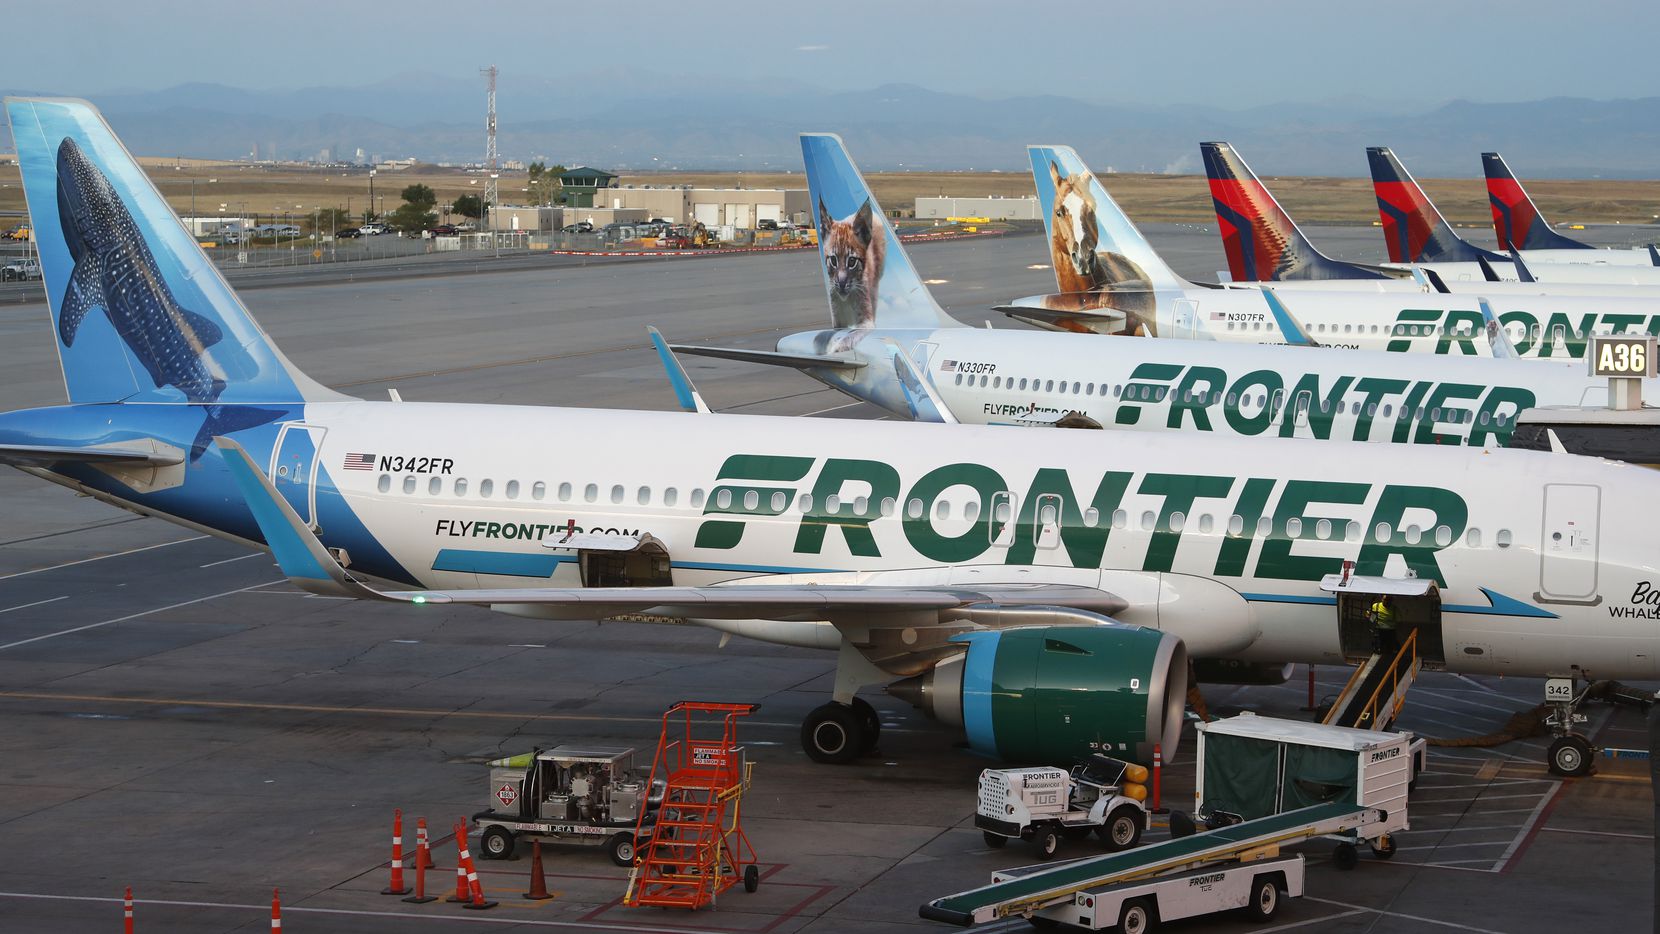 Frontier Airlines' home base is Denver International Airport.